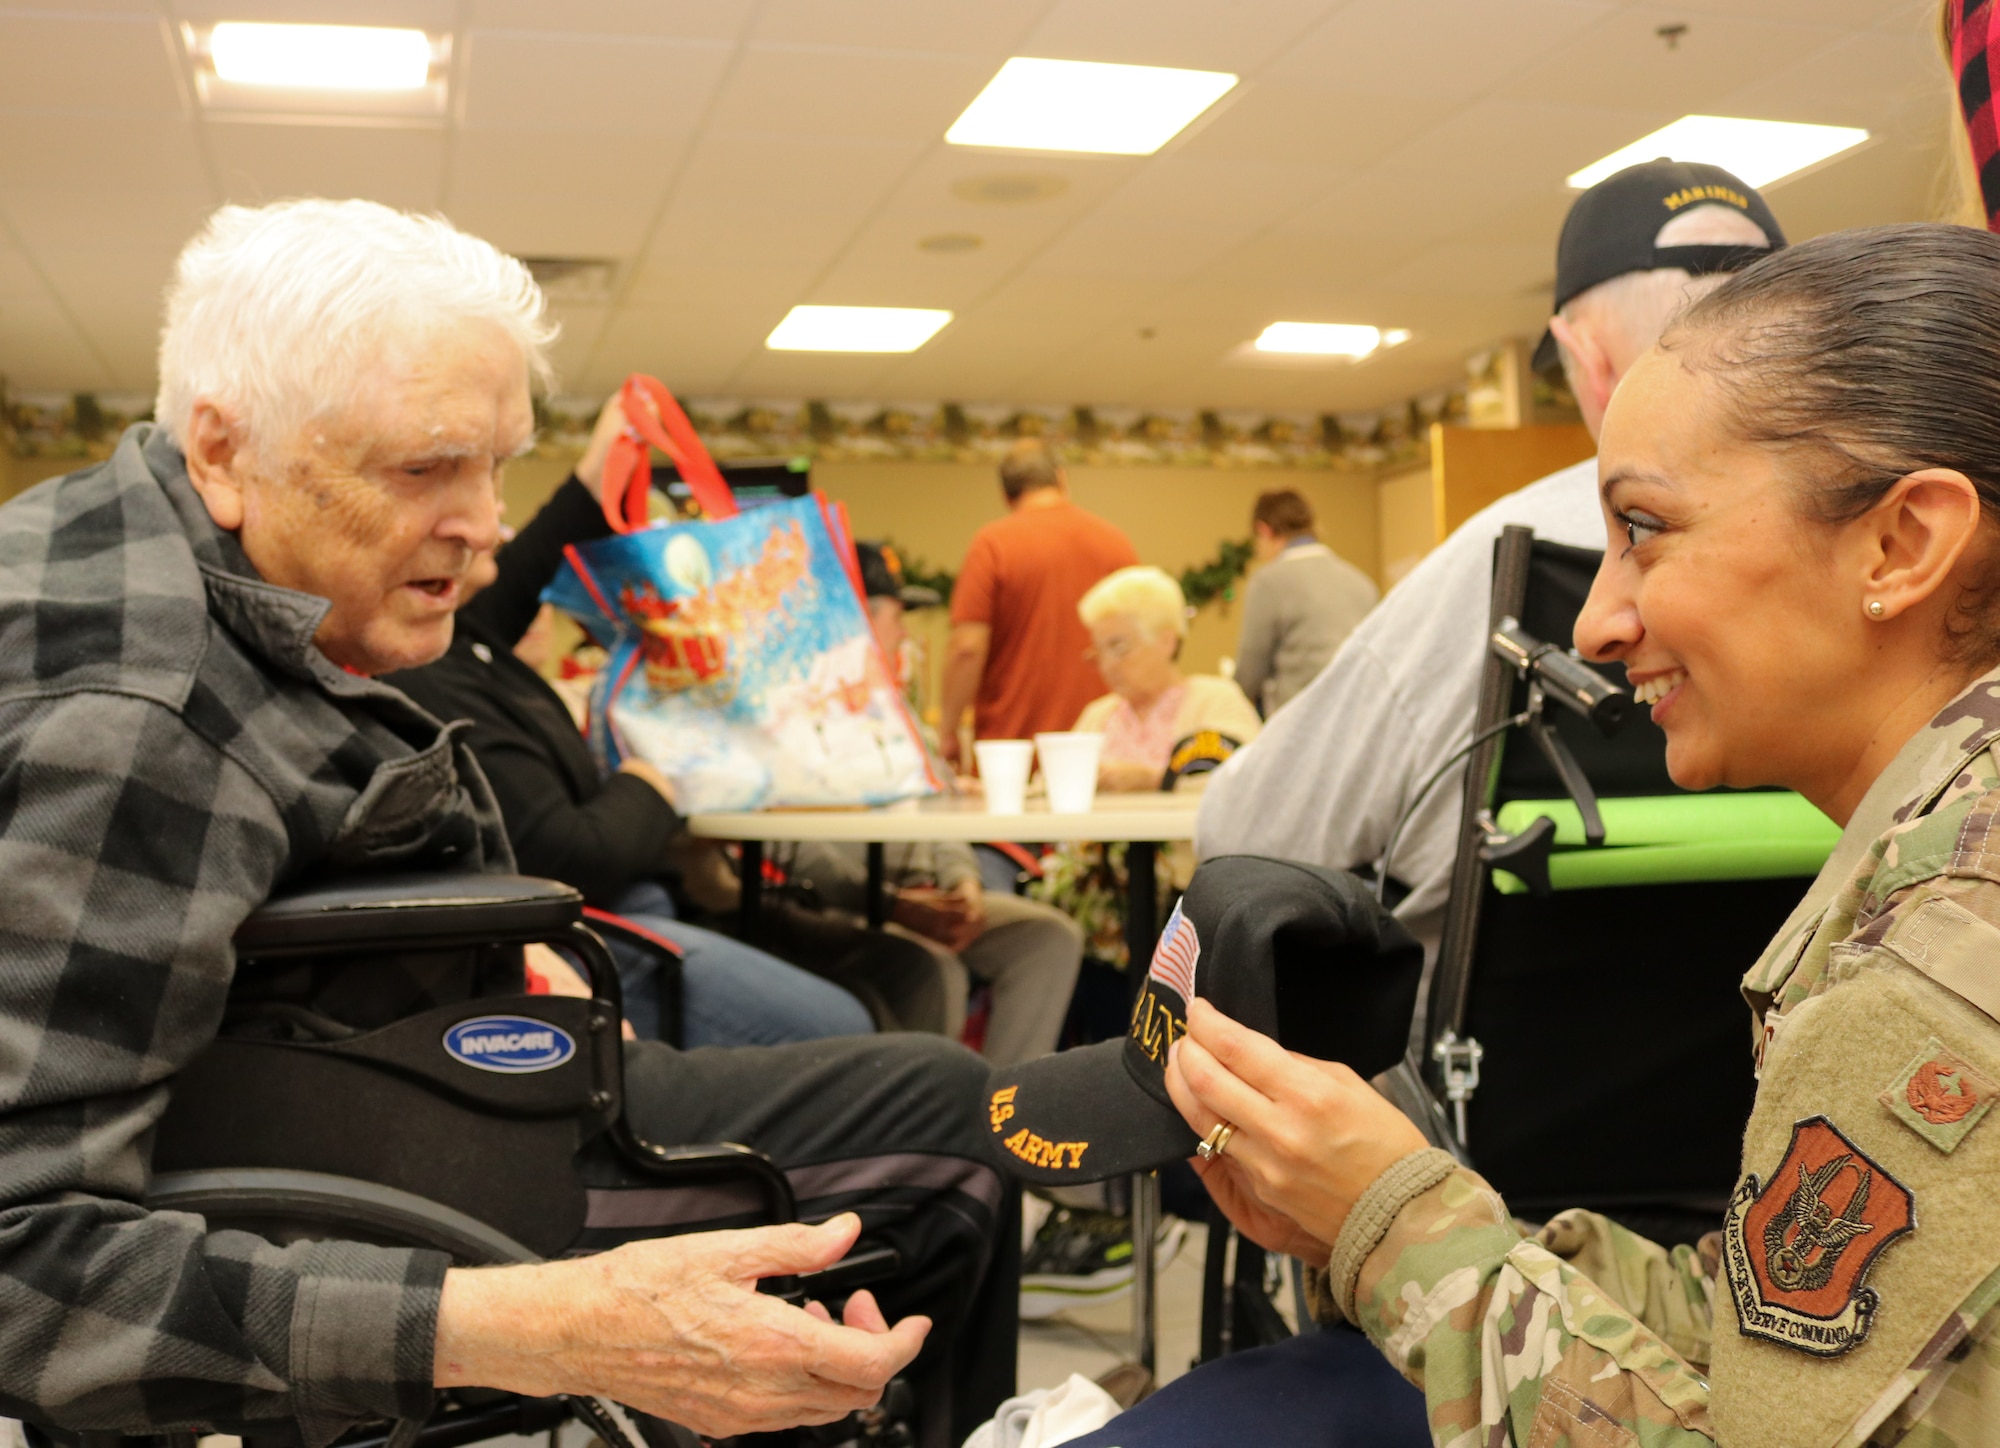 Members of the 507th Air Refueling Wing visited with veterans at the Norman Veteran's Center in Norman, Oklahoma, Dec. 20, 2019. (U.S. Air Force photo by Senior Airman Mary Begy)